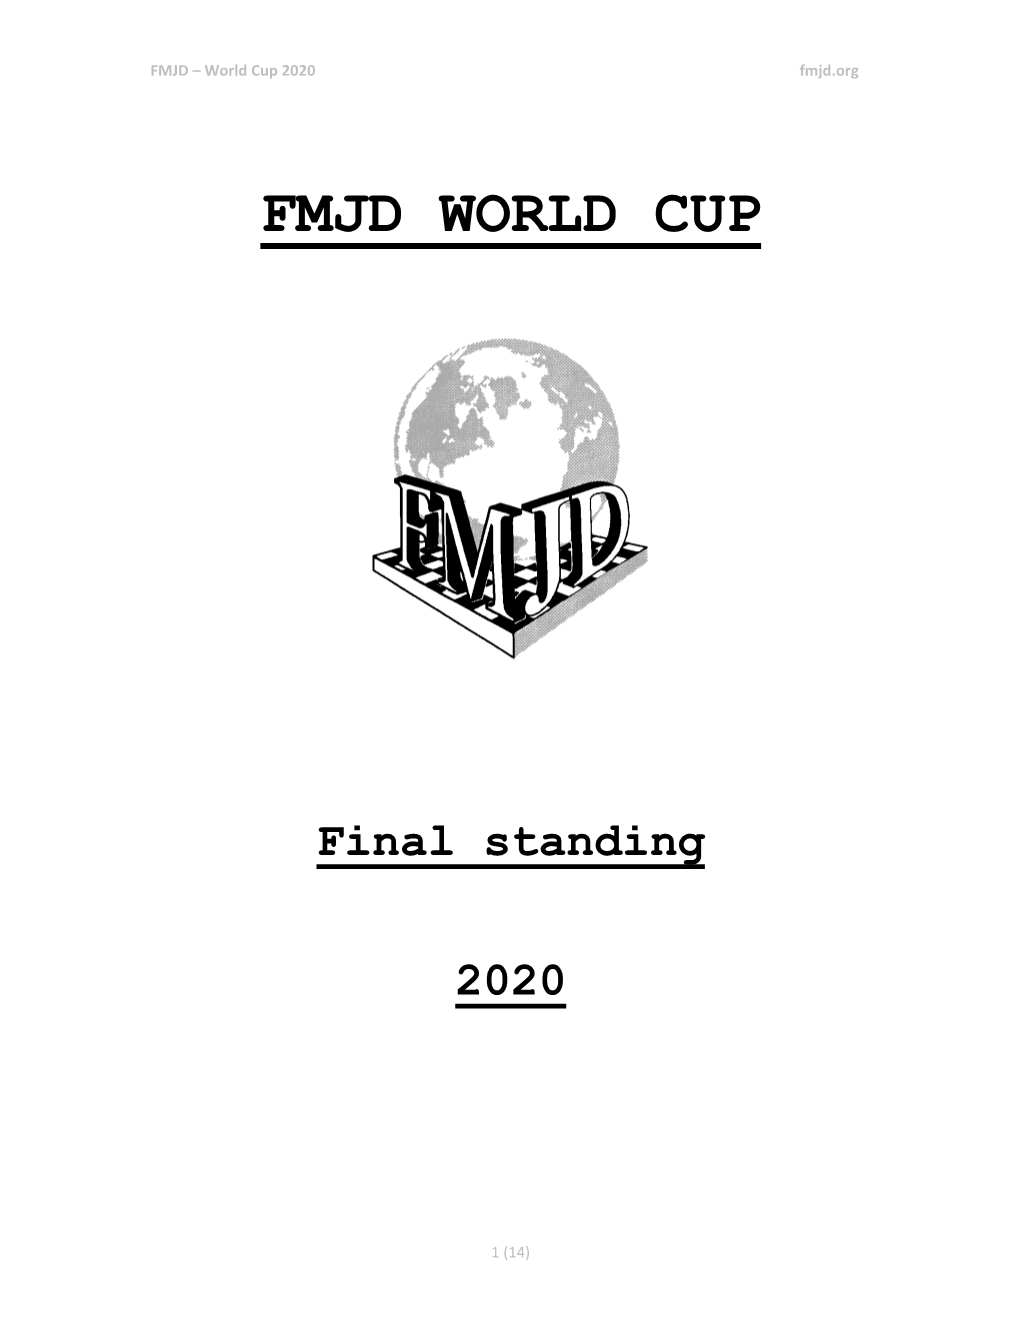 FMJD World Cup 2019